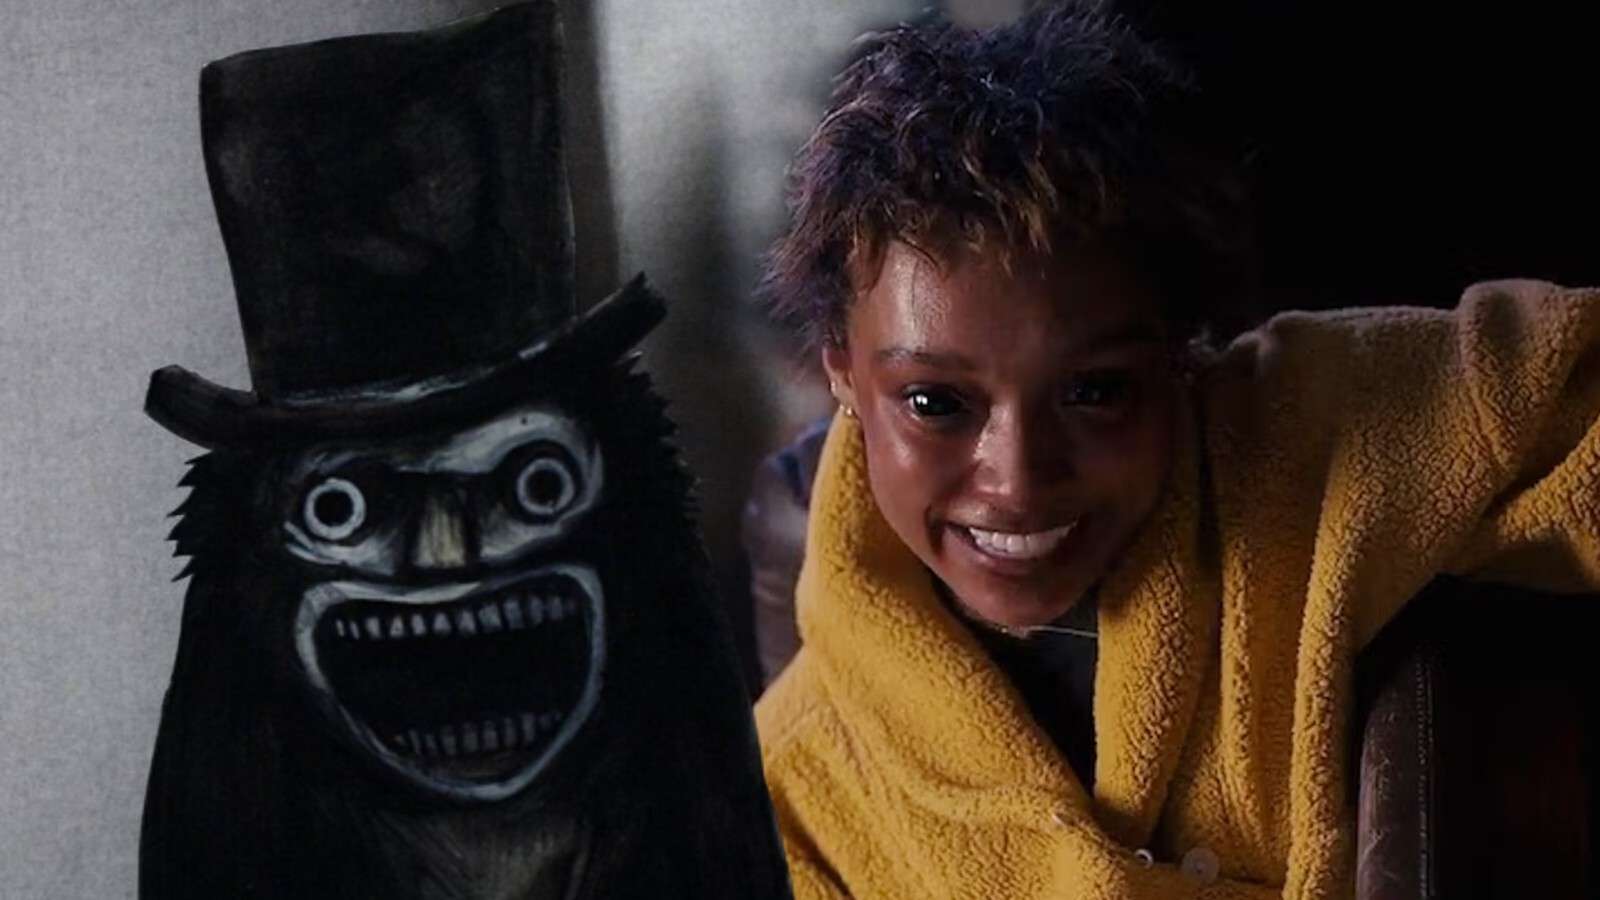 The Babadook and Talk to Me.